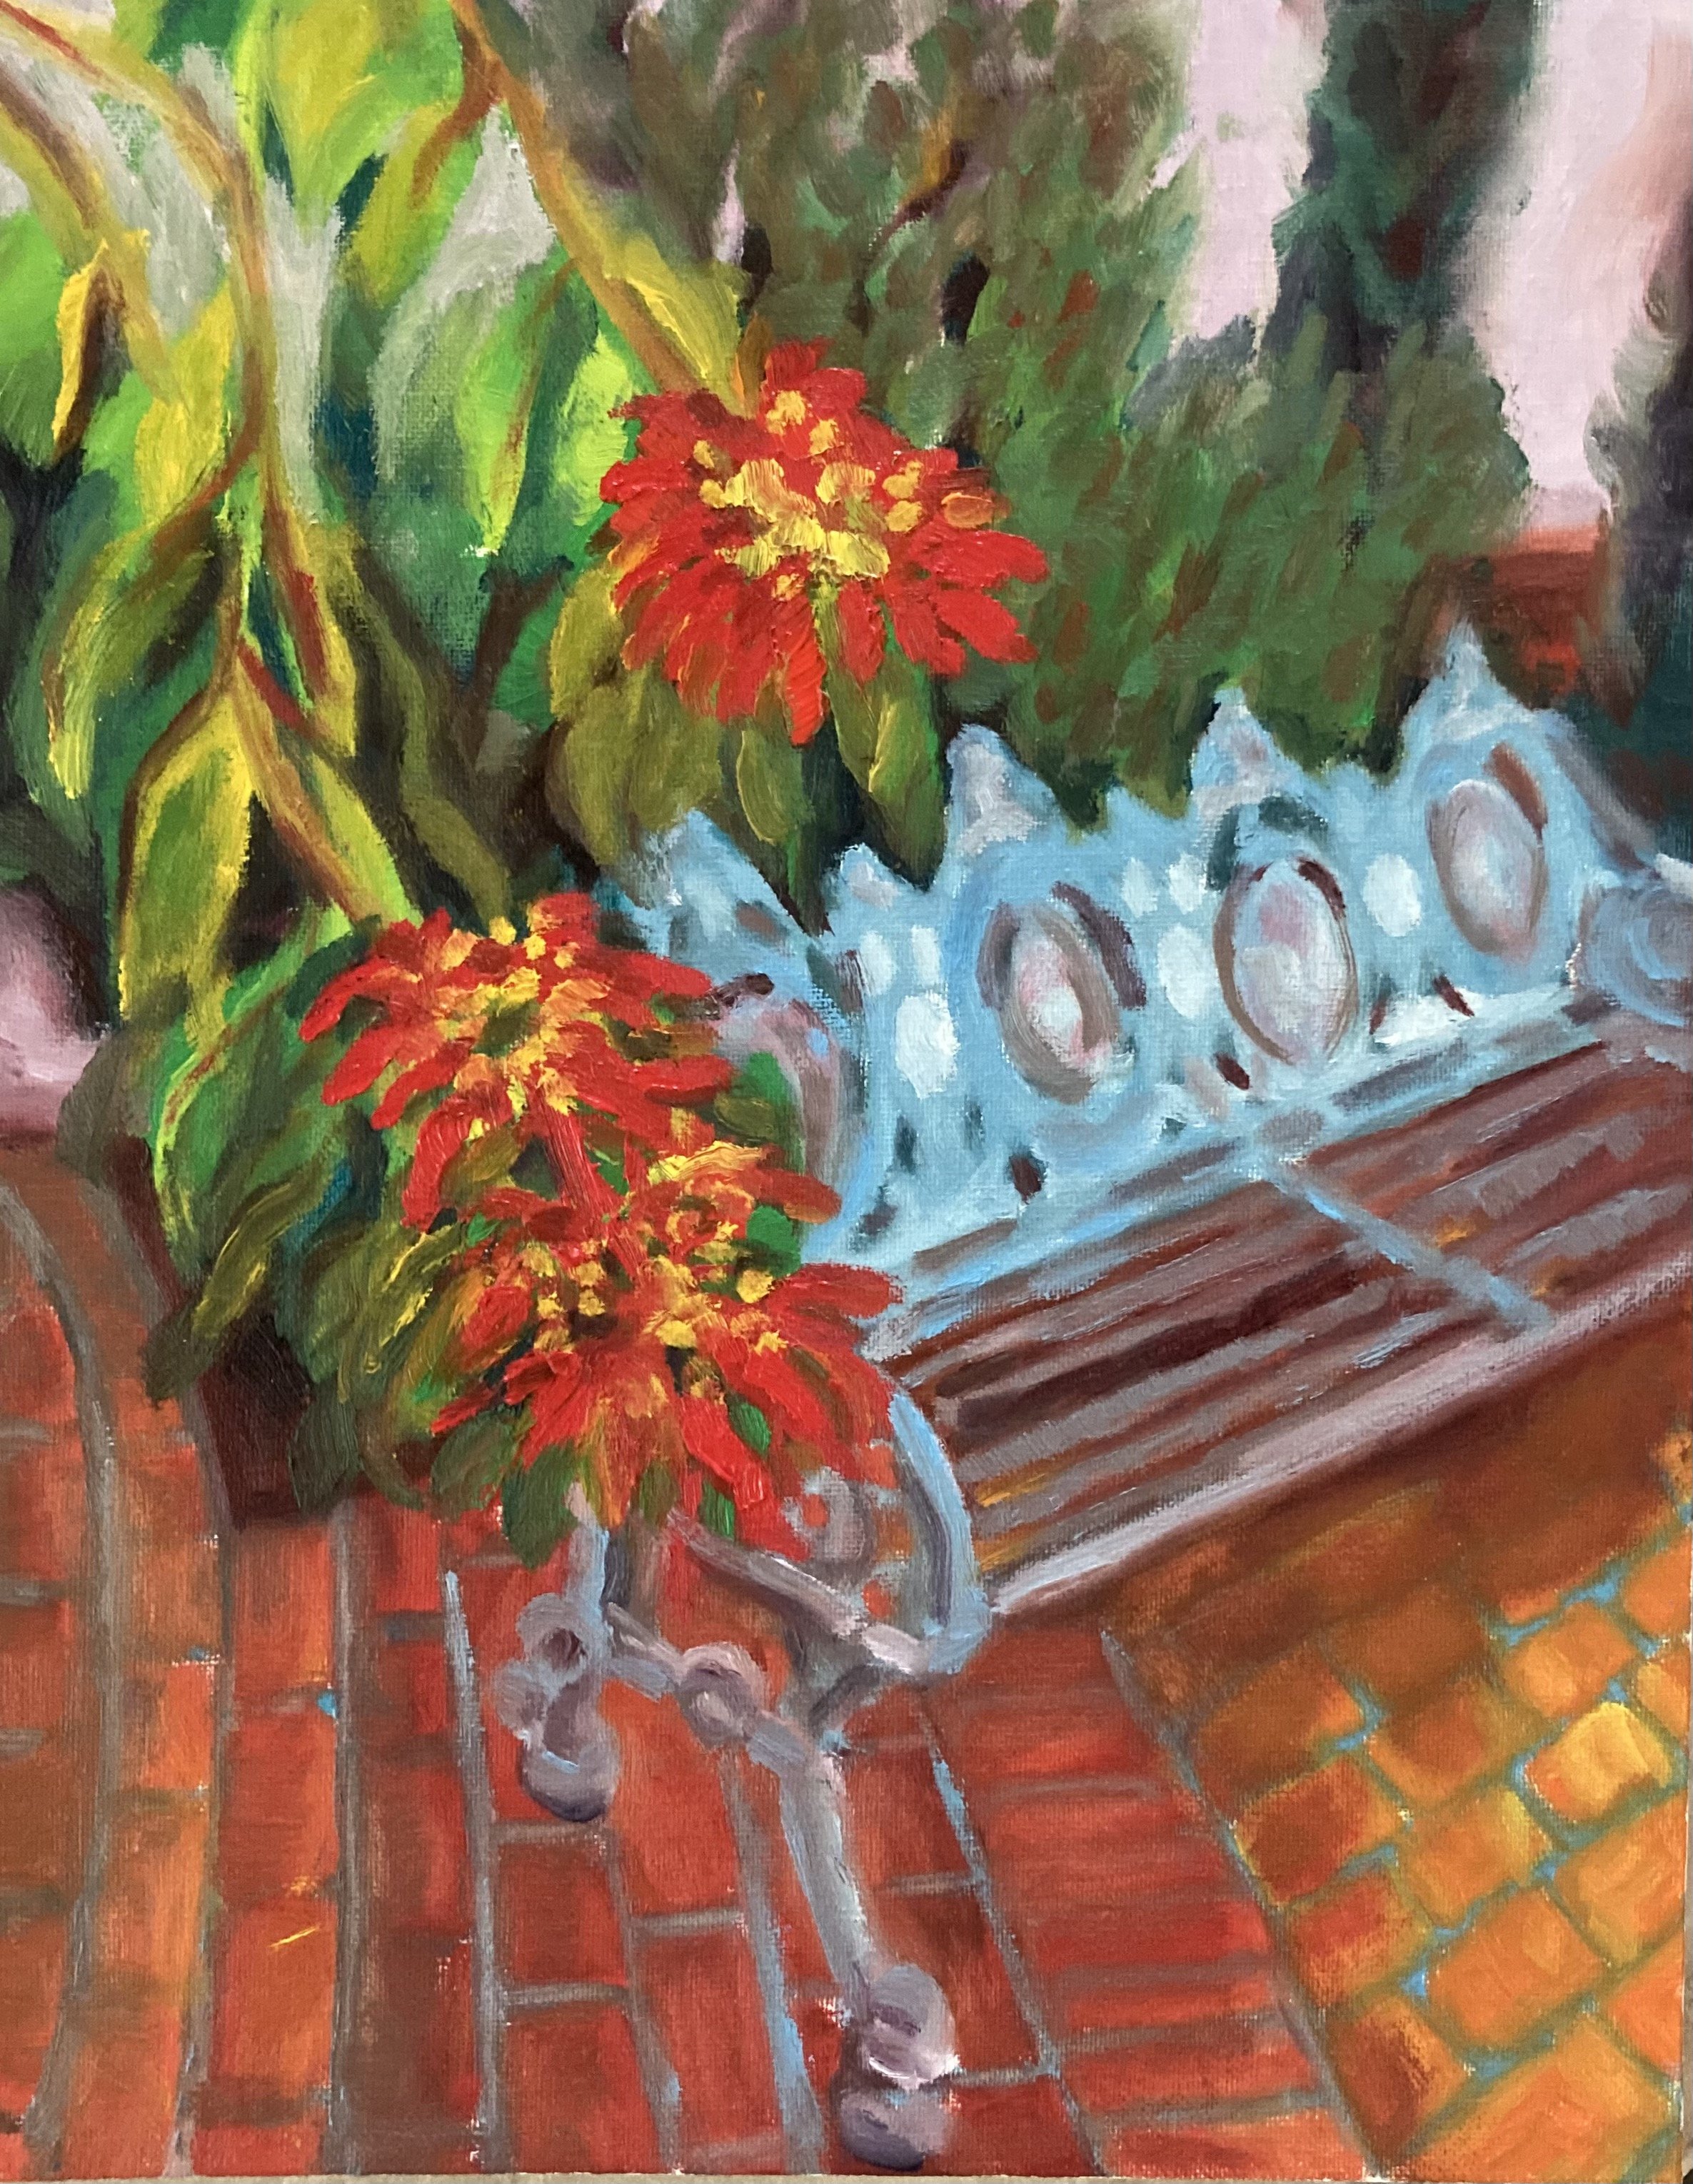 The Bench at the Athenaeum, 2019